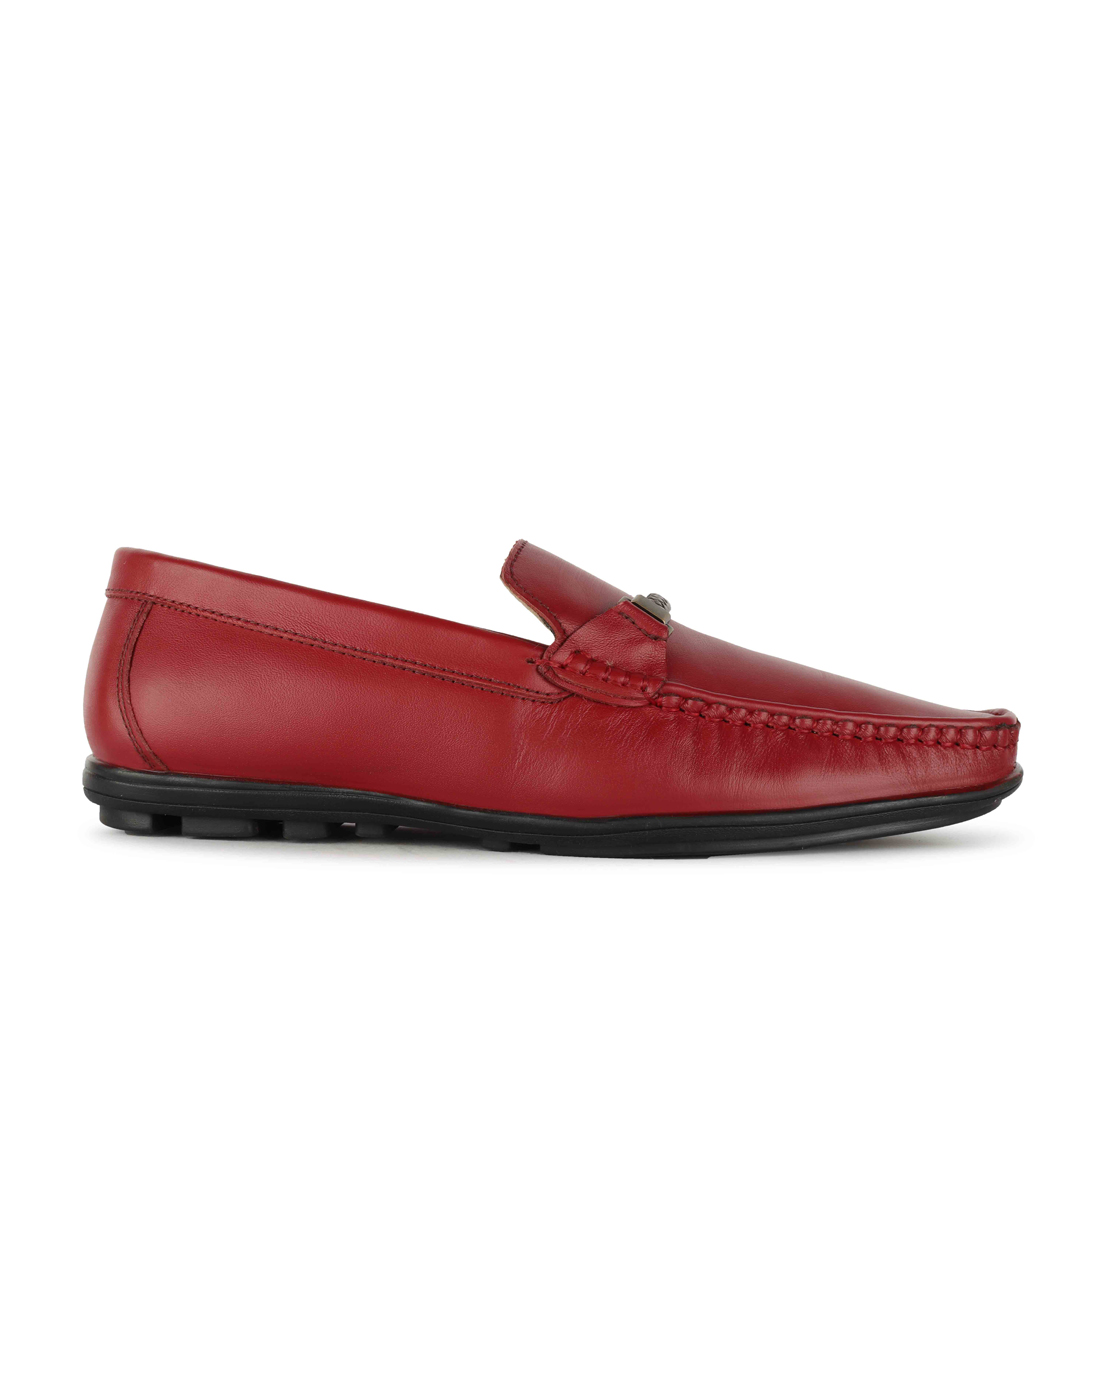 Red Loafers - Buy Red Pure Leather Loafers @ Rs.1800 Only | Agra Shoe Mart